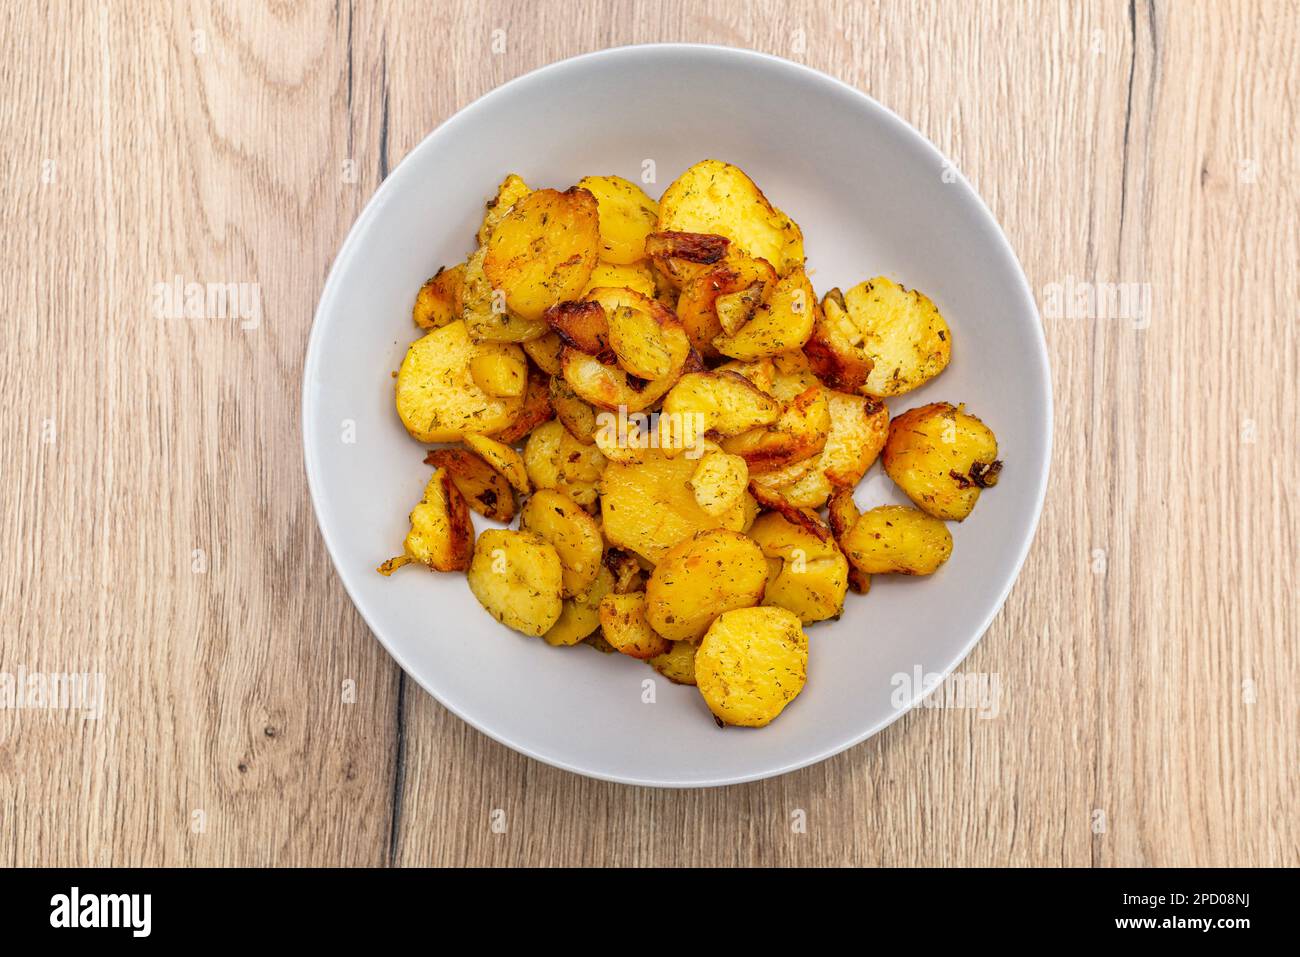 Boiled potatoes and later baked in slices on the grill, lying in a round plate. Stock Photo